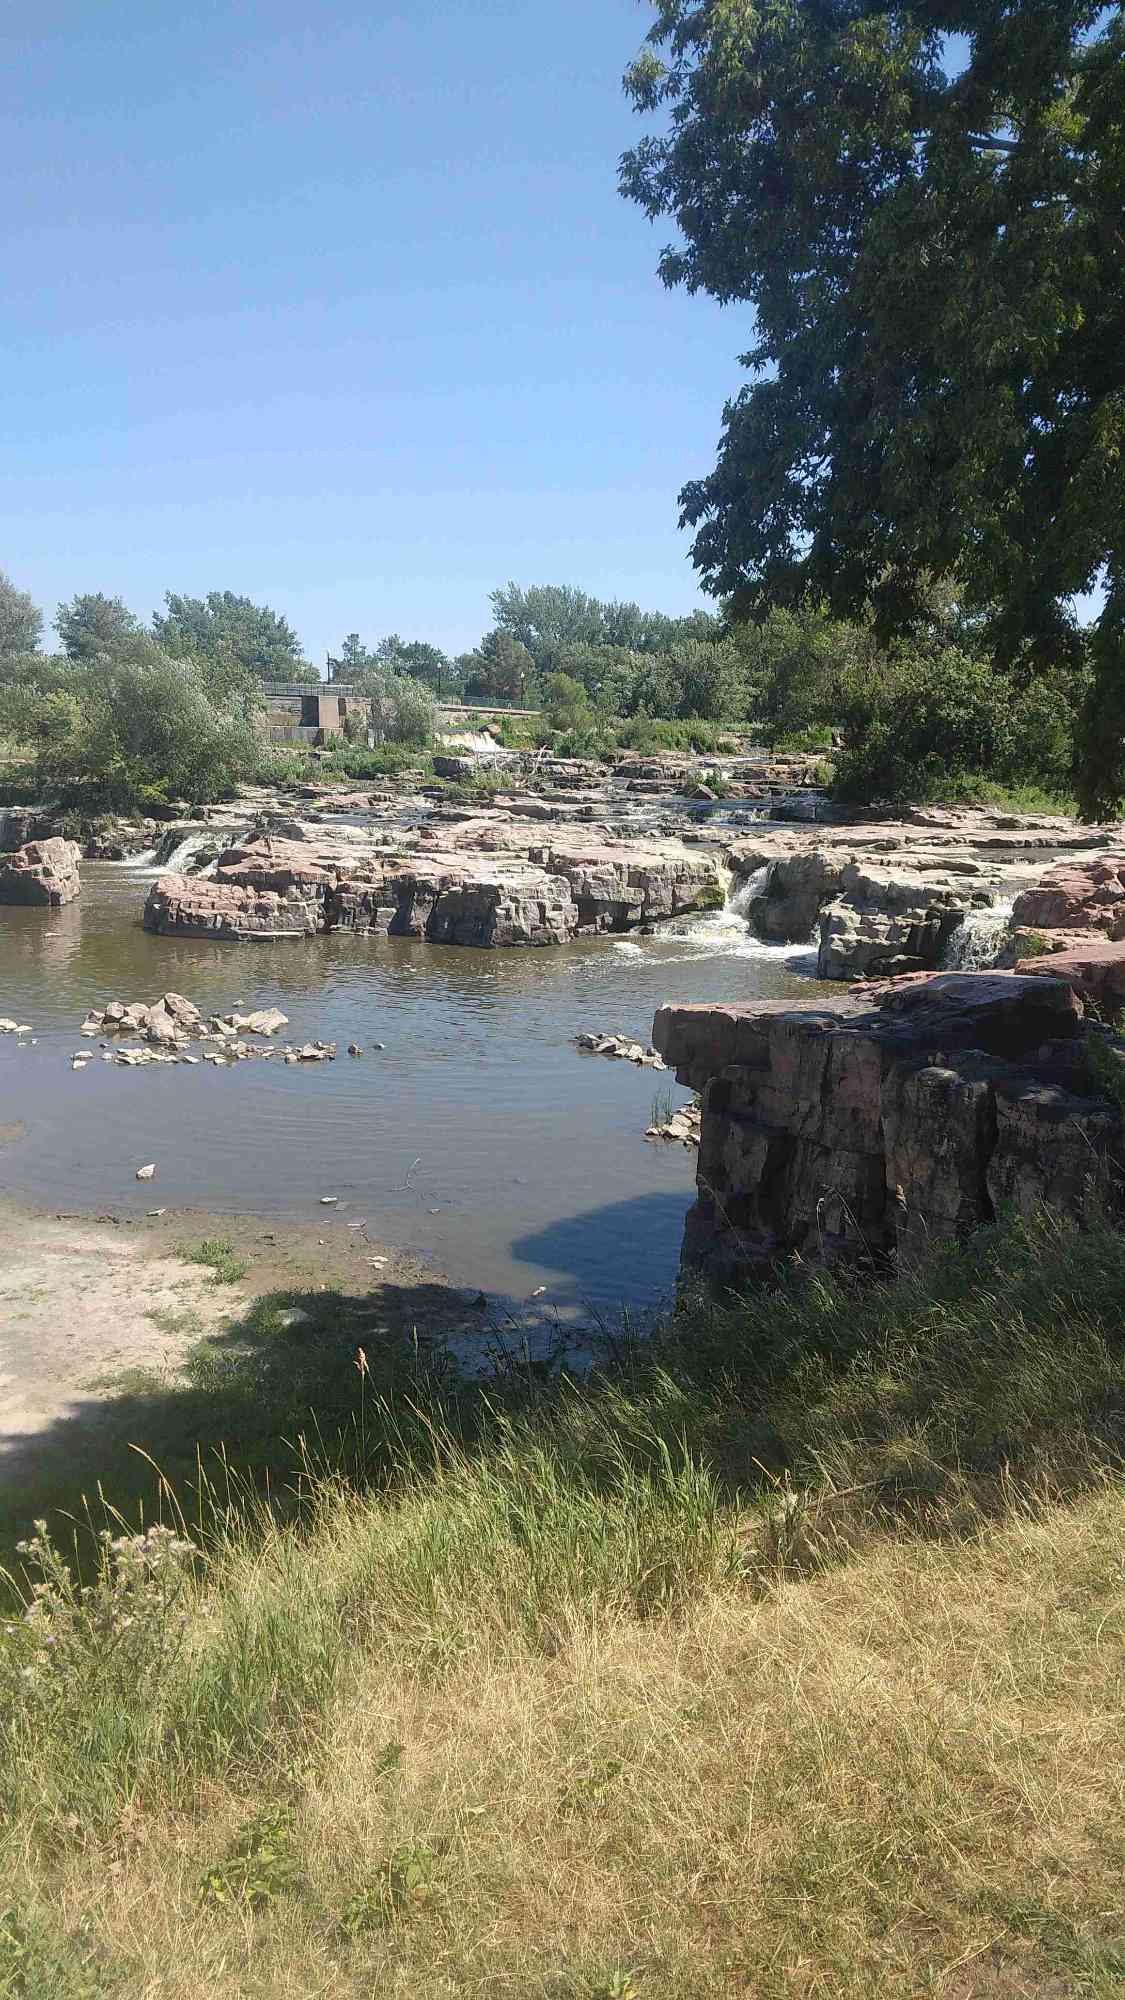 The Sioux Falls